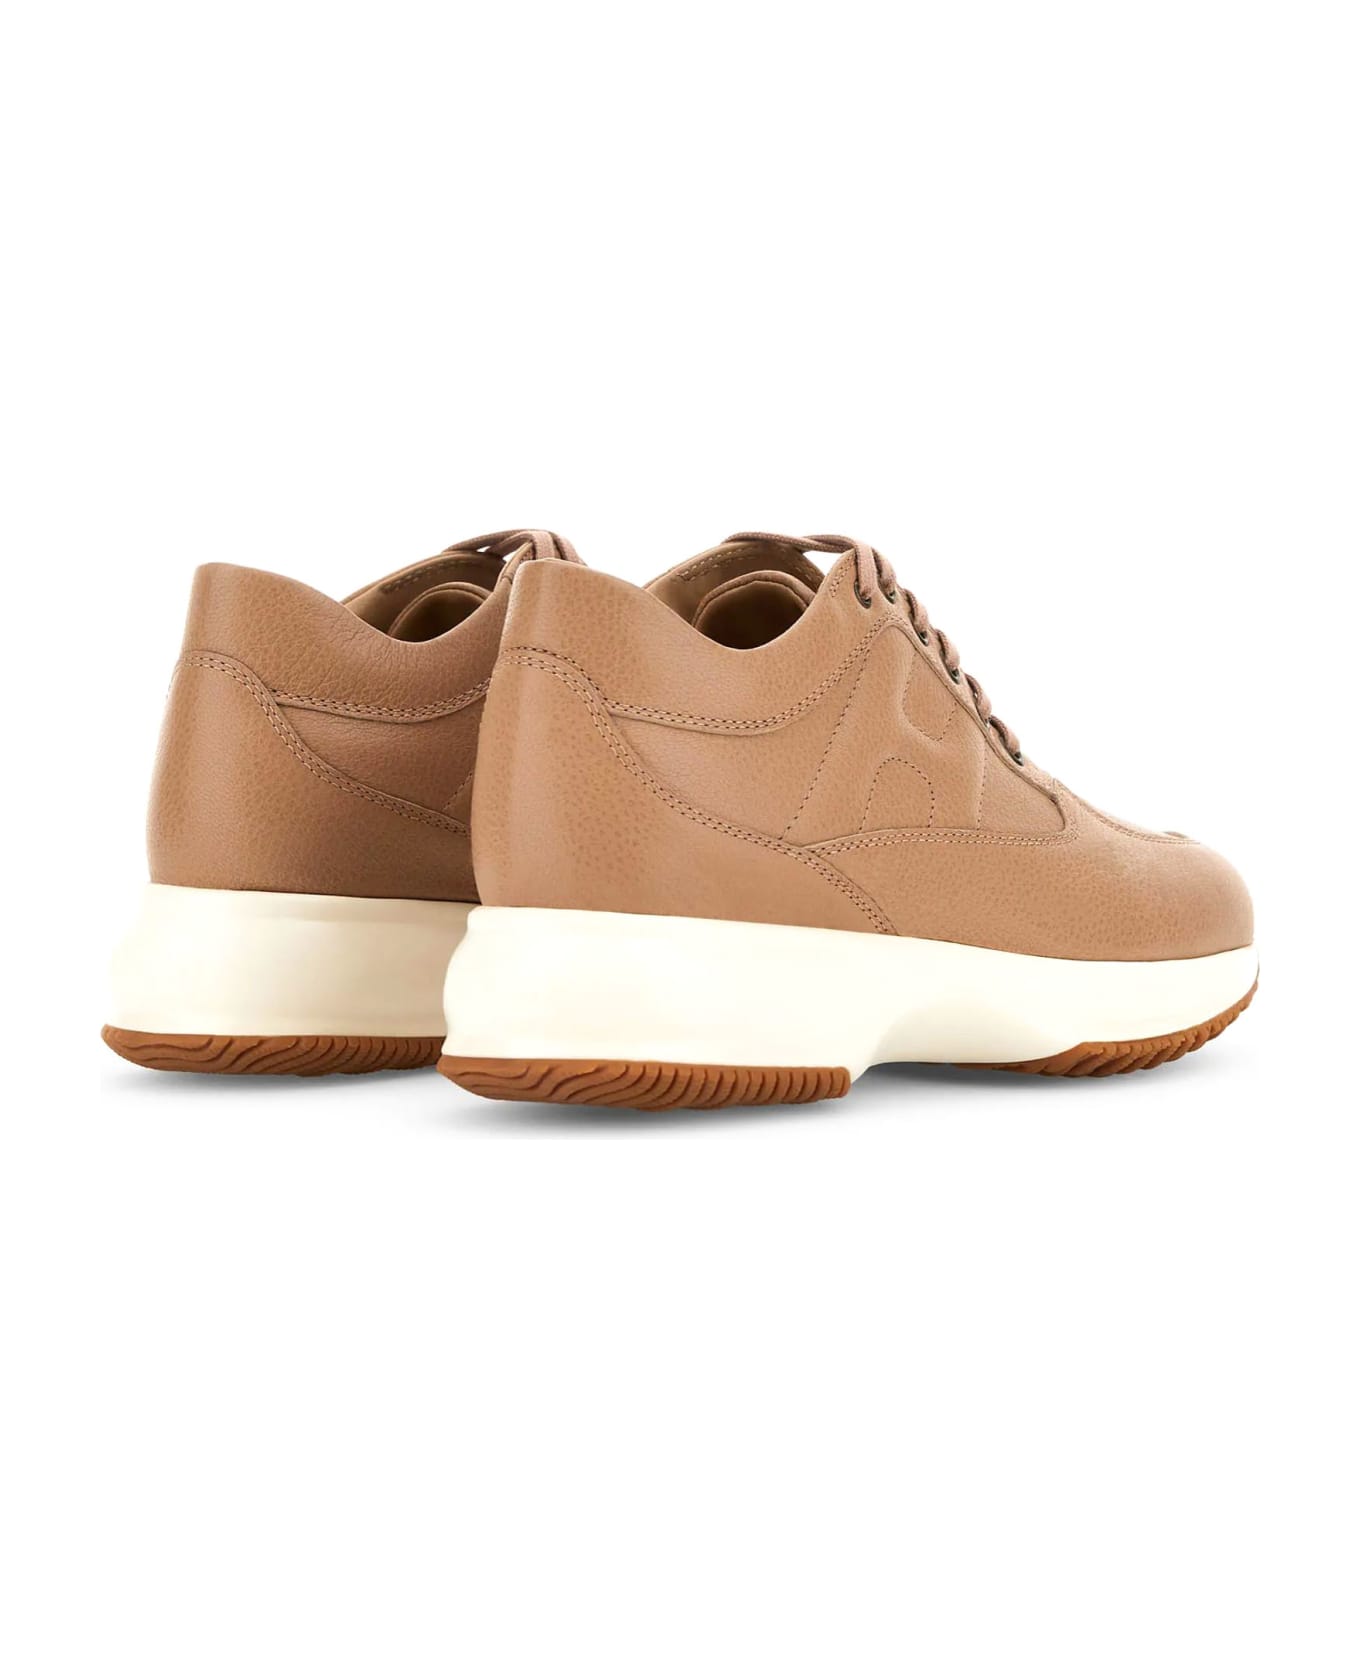 Hogan Interactive Leather Sneakers - CARNE MEDIO スニーカー